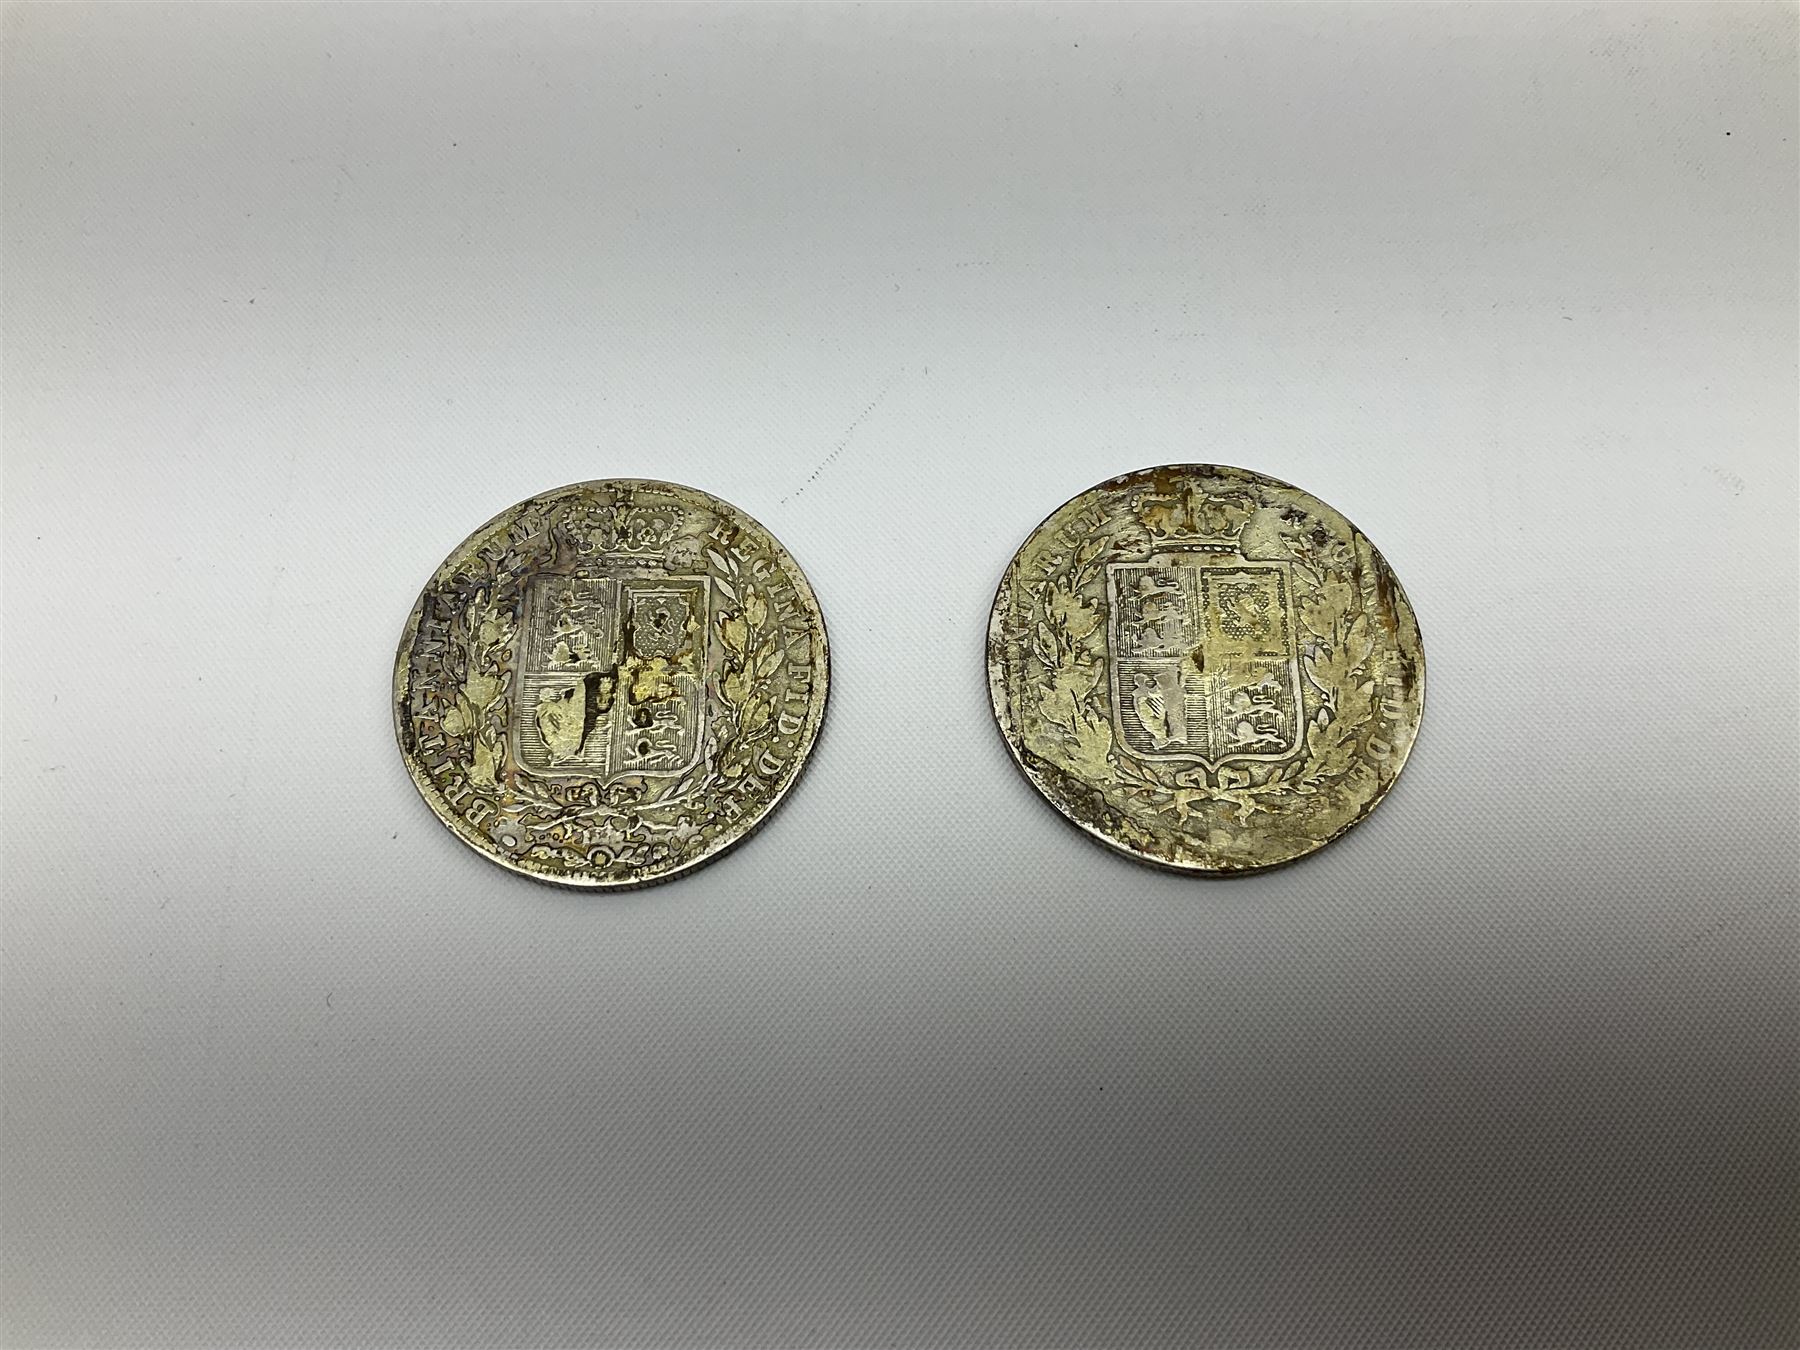 Queen Victoria 1875 and 1880 half crown coin - Image 2 of 7